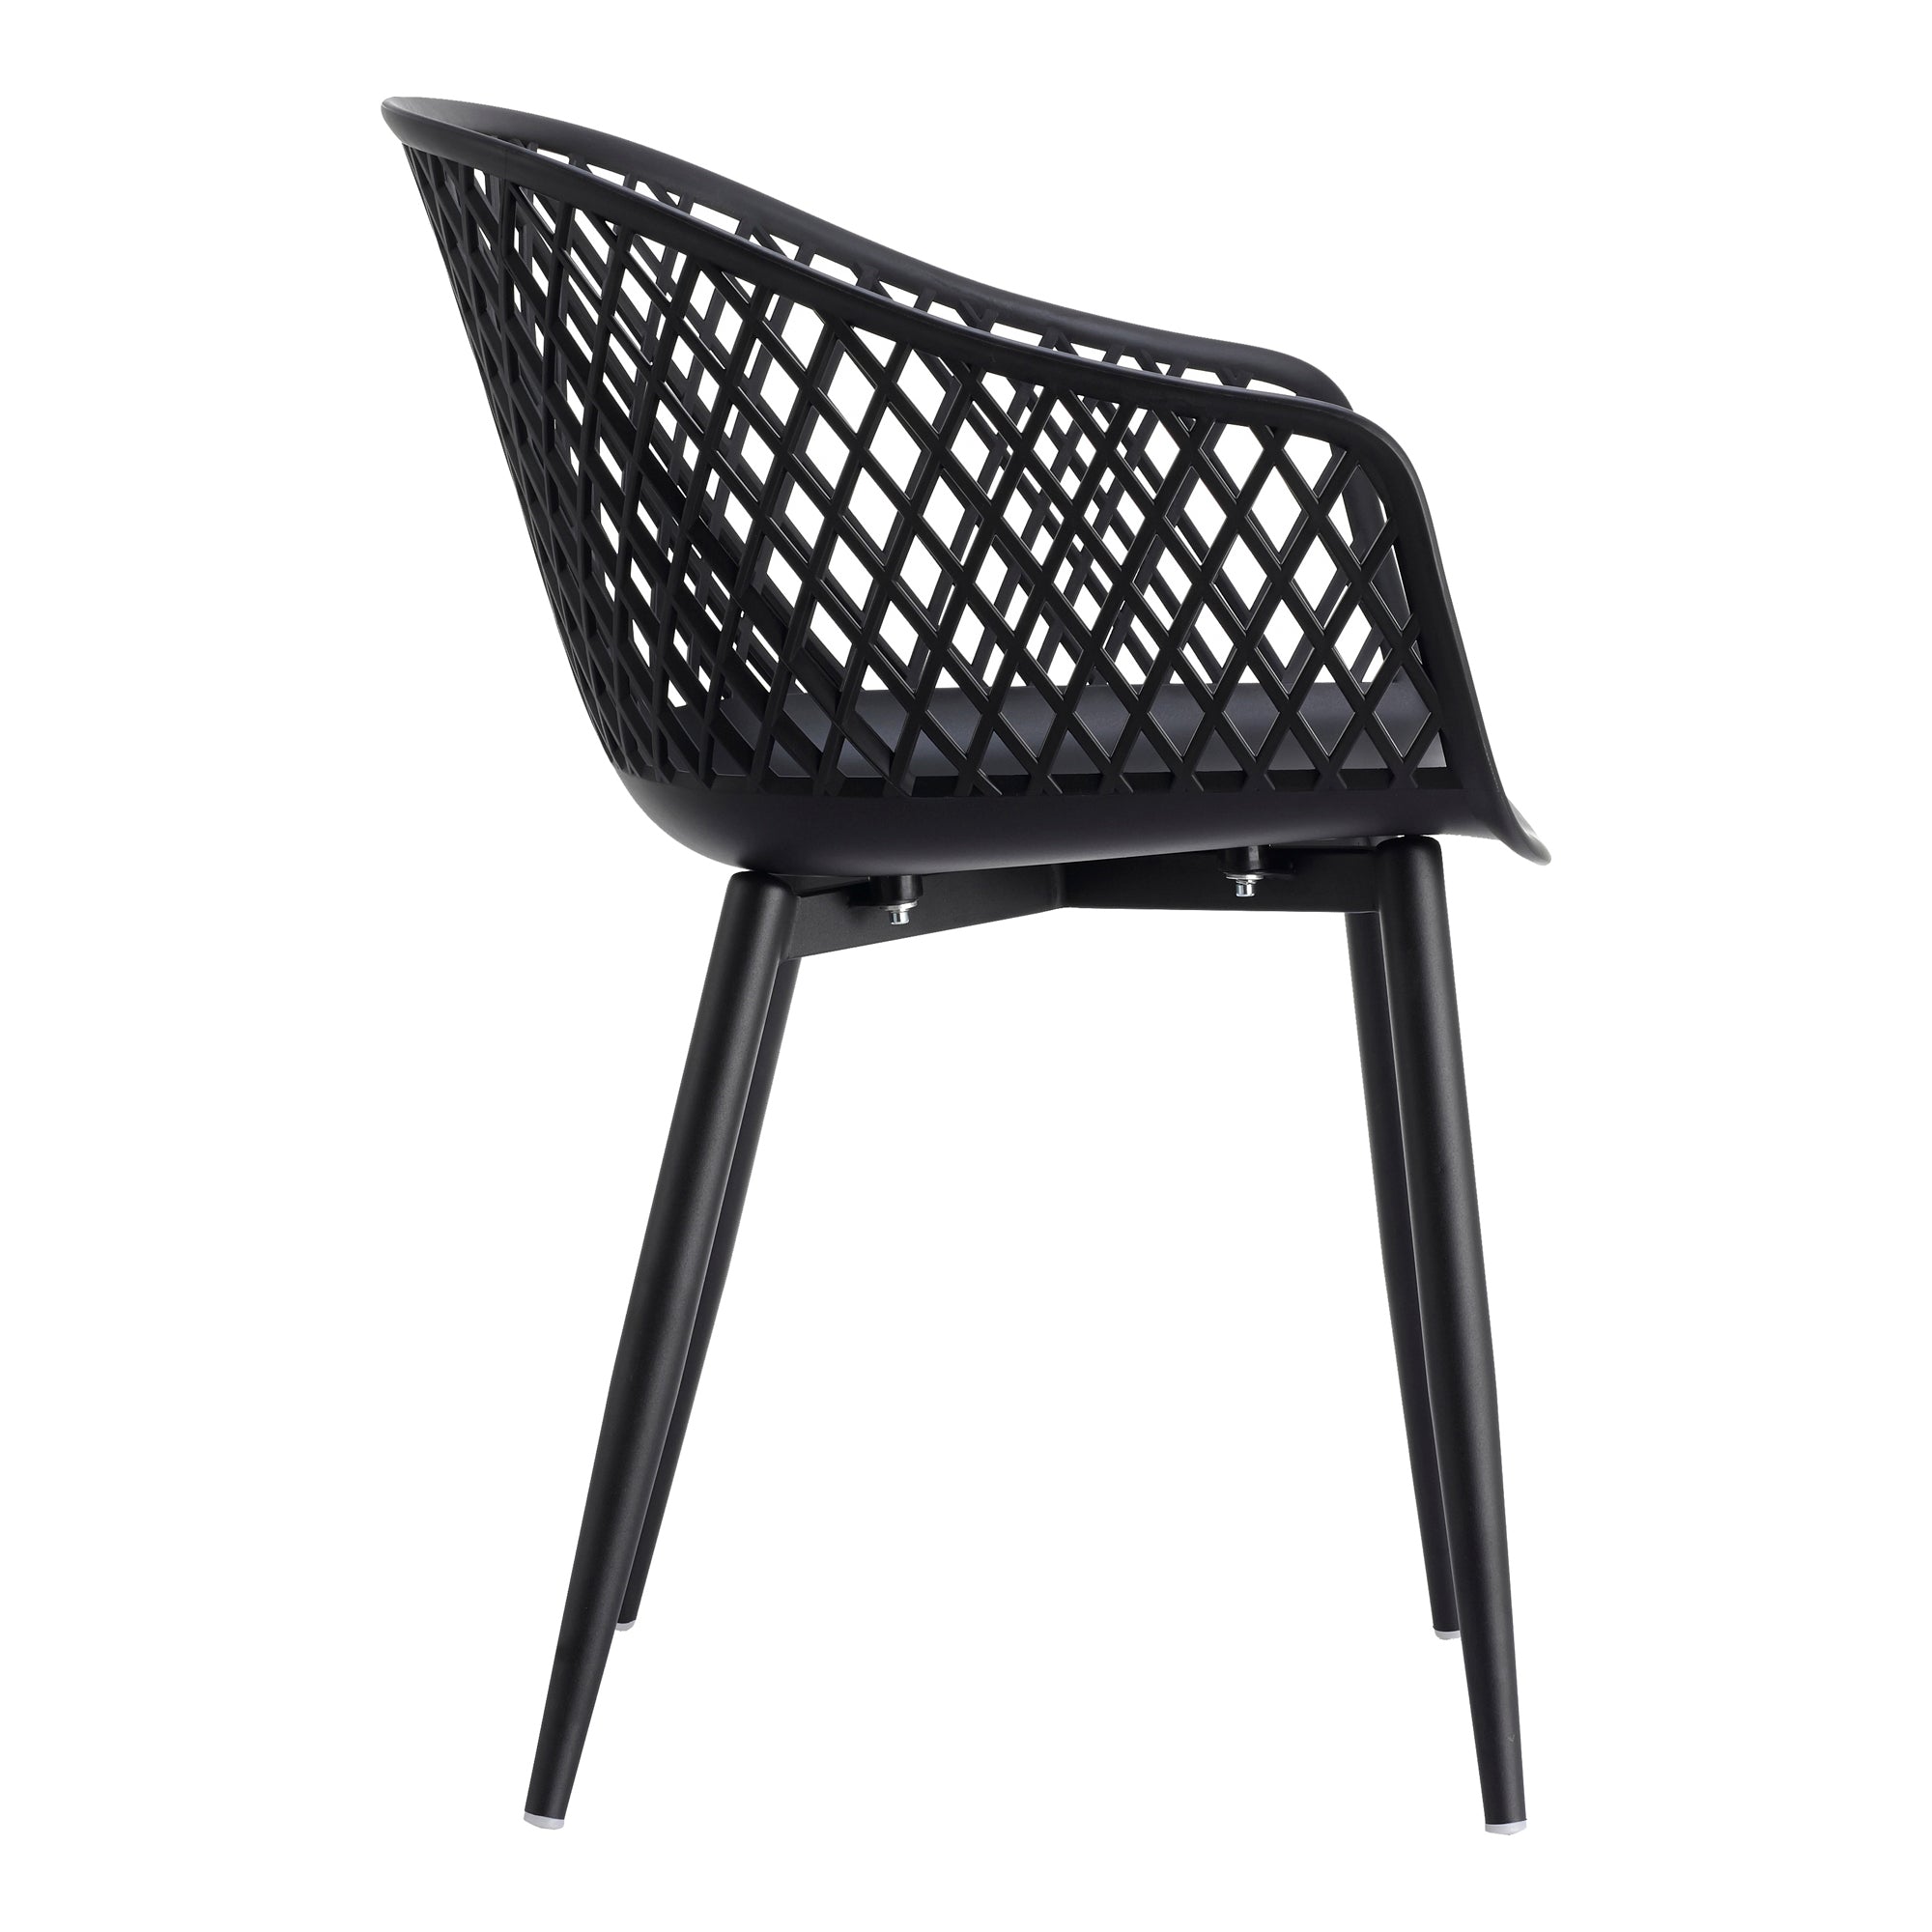 Piazza Outdoor Chair Black - Set Of Two